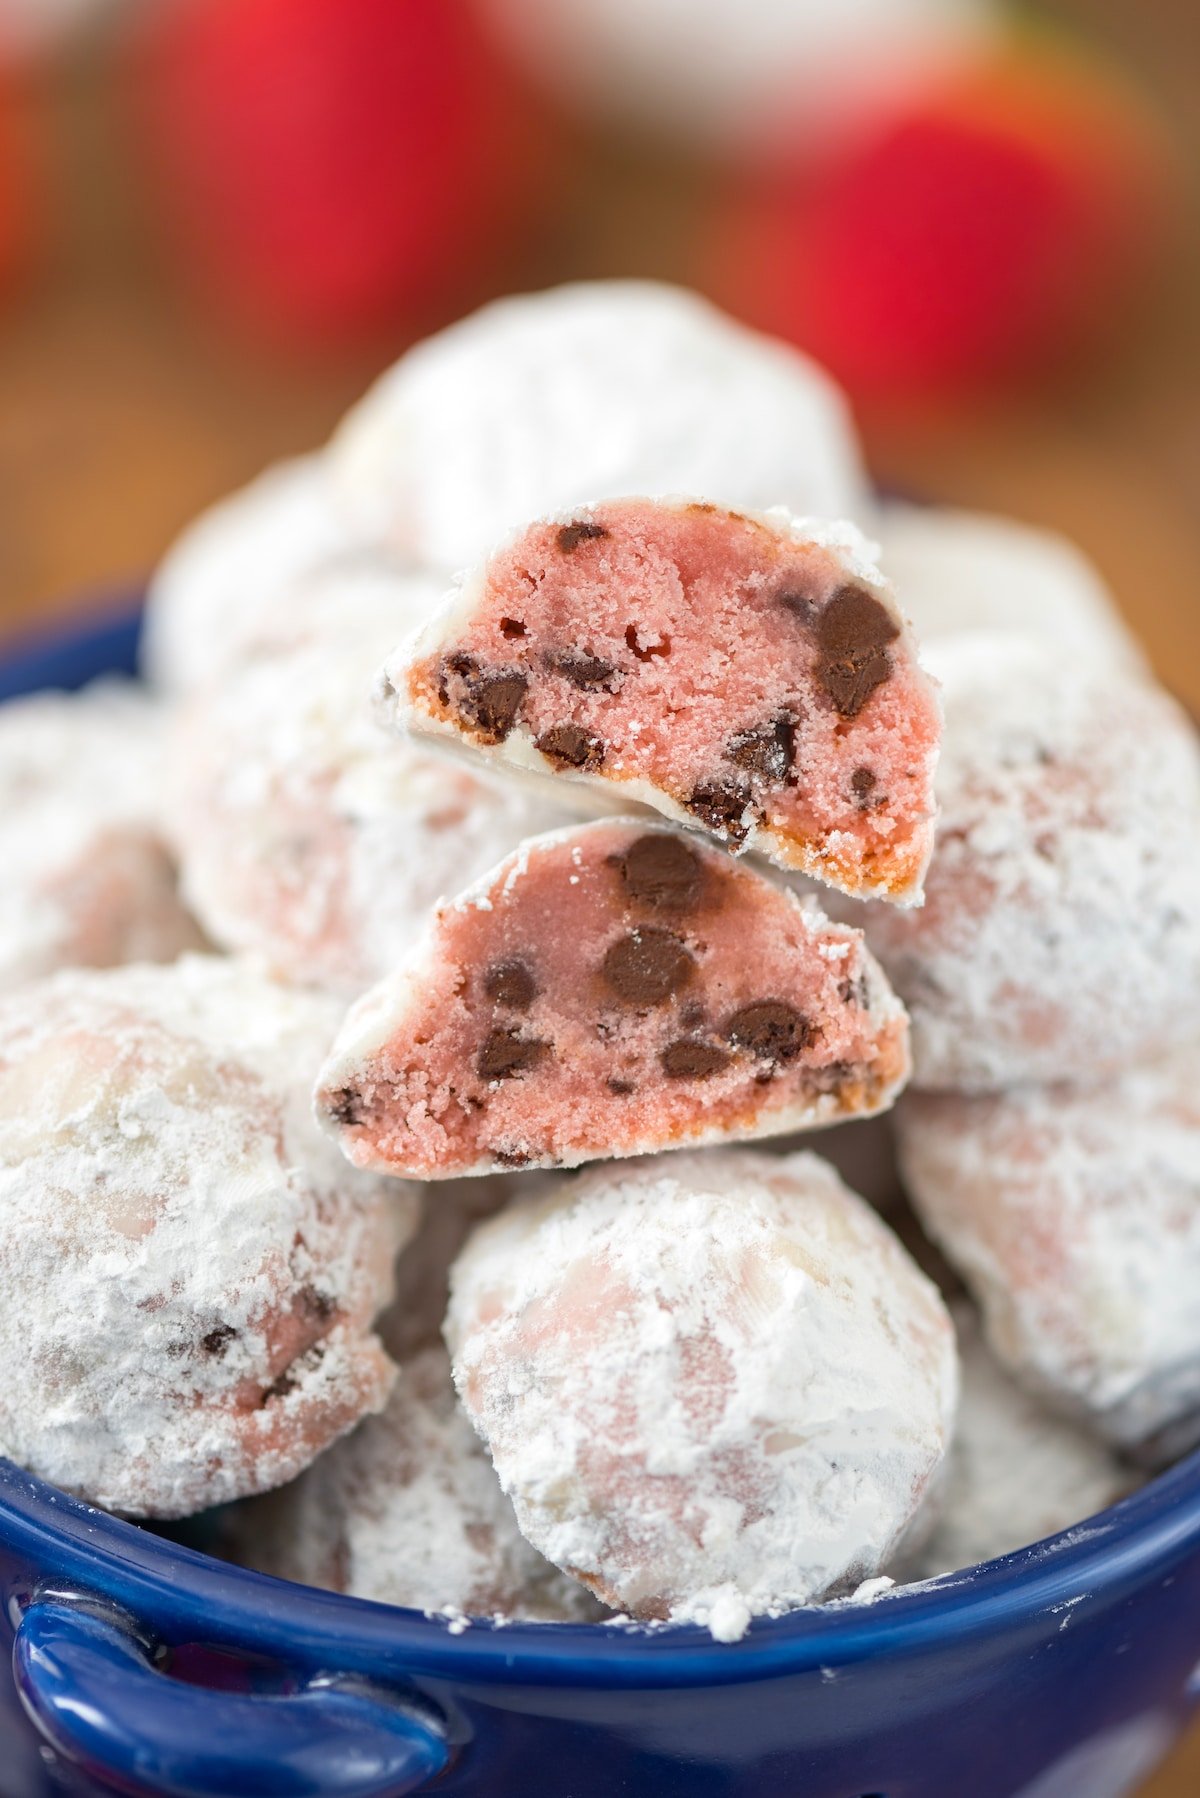 strawberry snowballs cut in half with chocolate chips baked in.